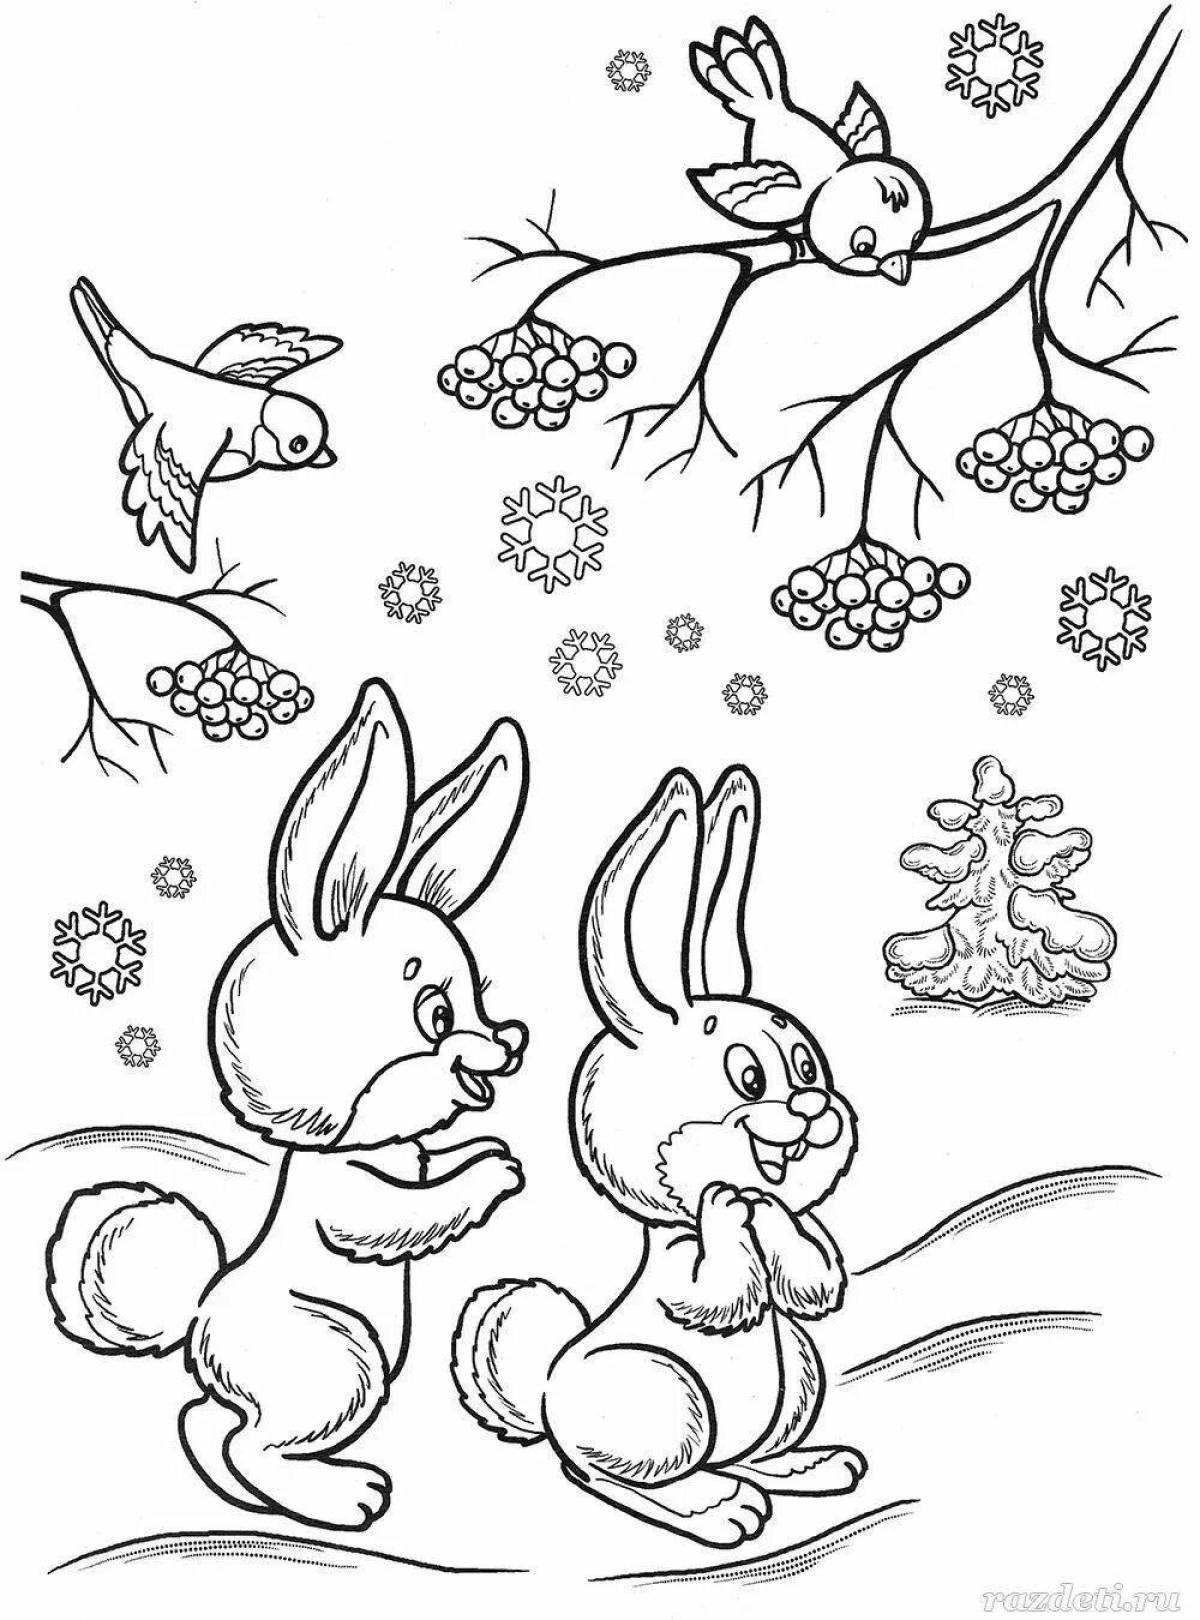 Colorful christmas rabbit coloring book